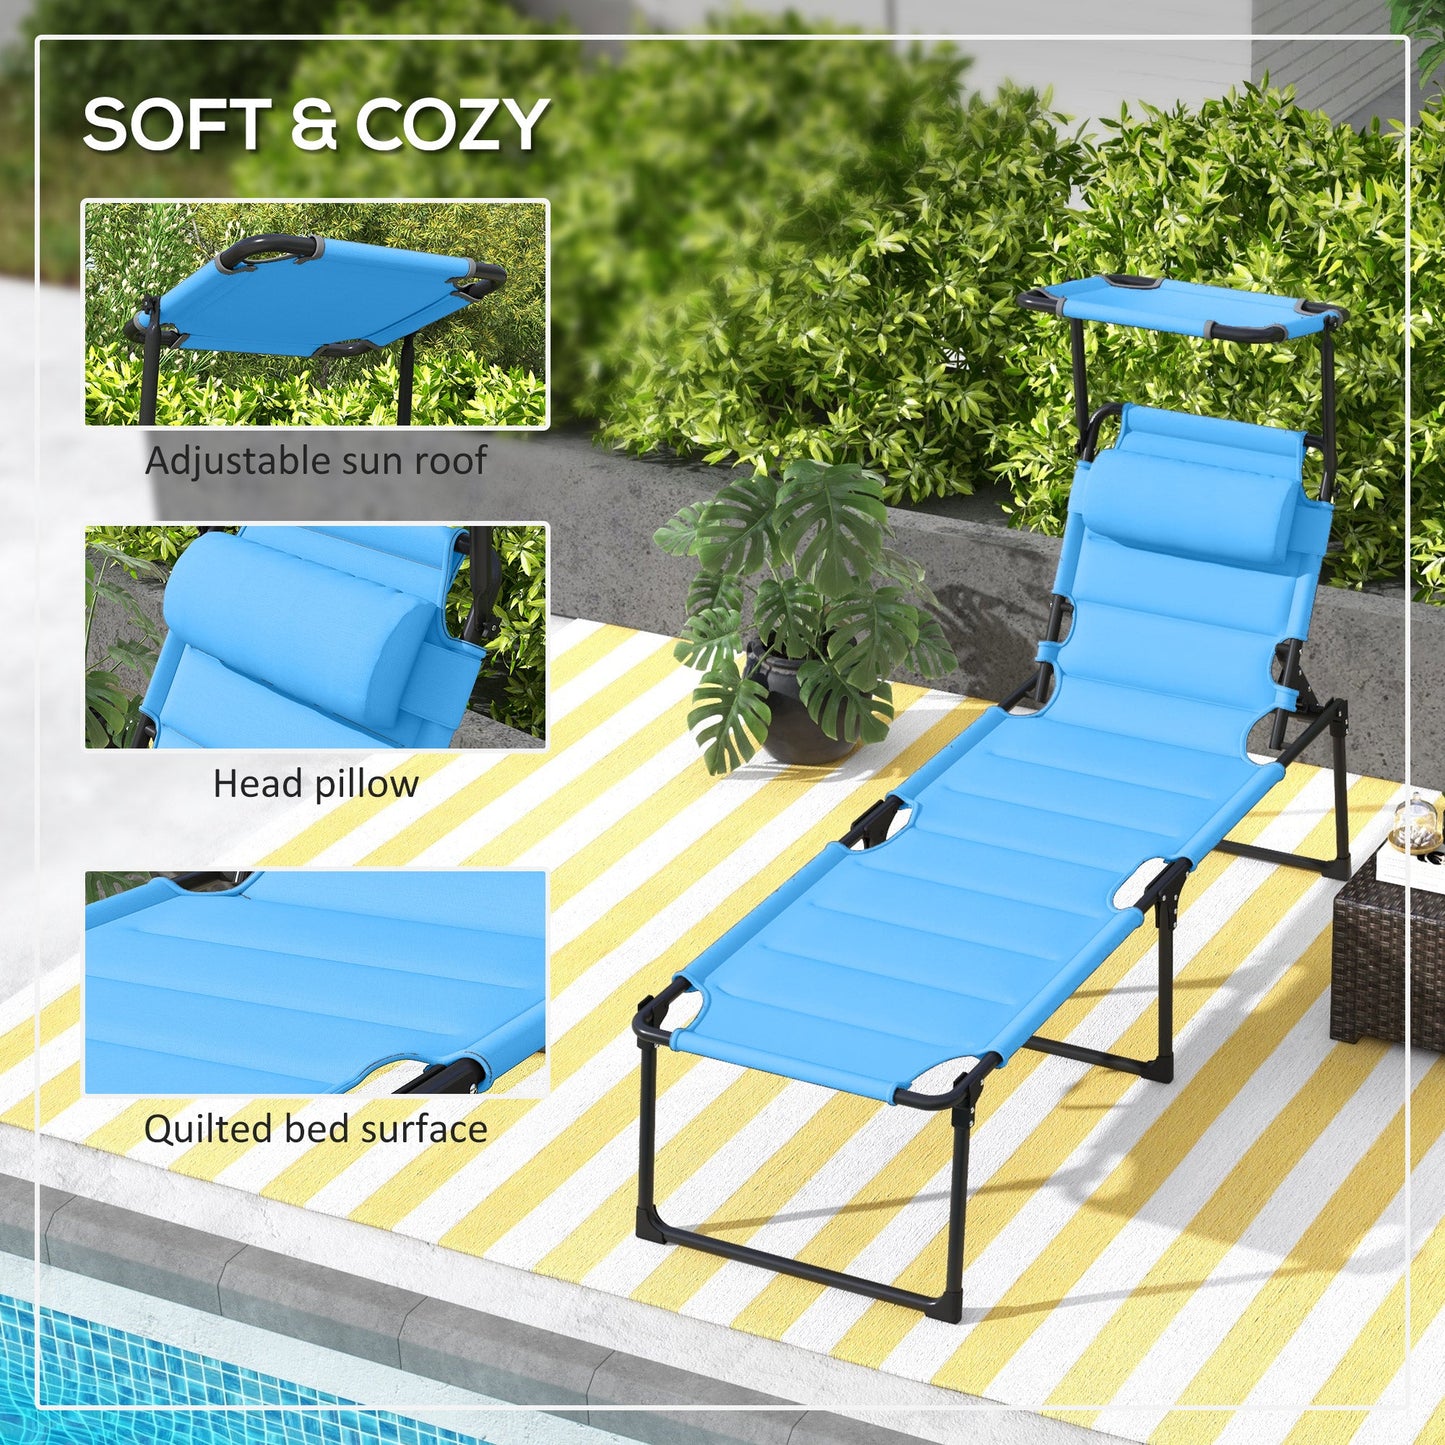 -Outsunny 2 Folding Chaise Lounge Pool Chairs, Outdoor Sun Tanning Chairs w/ Sunroof, Headrests, 4-Position Reclining Back, Blue - Outdoor Style Company